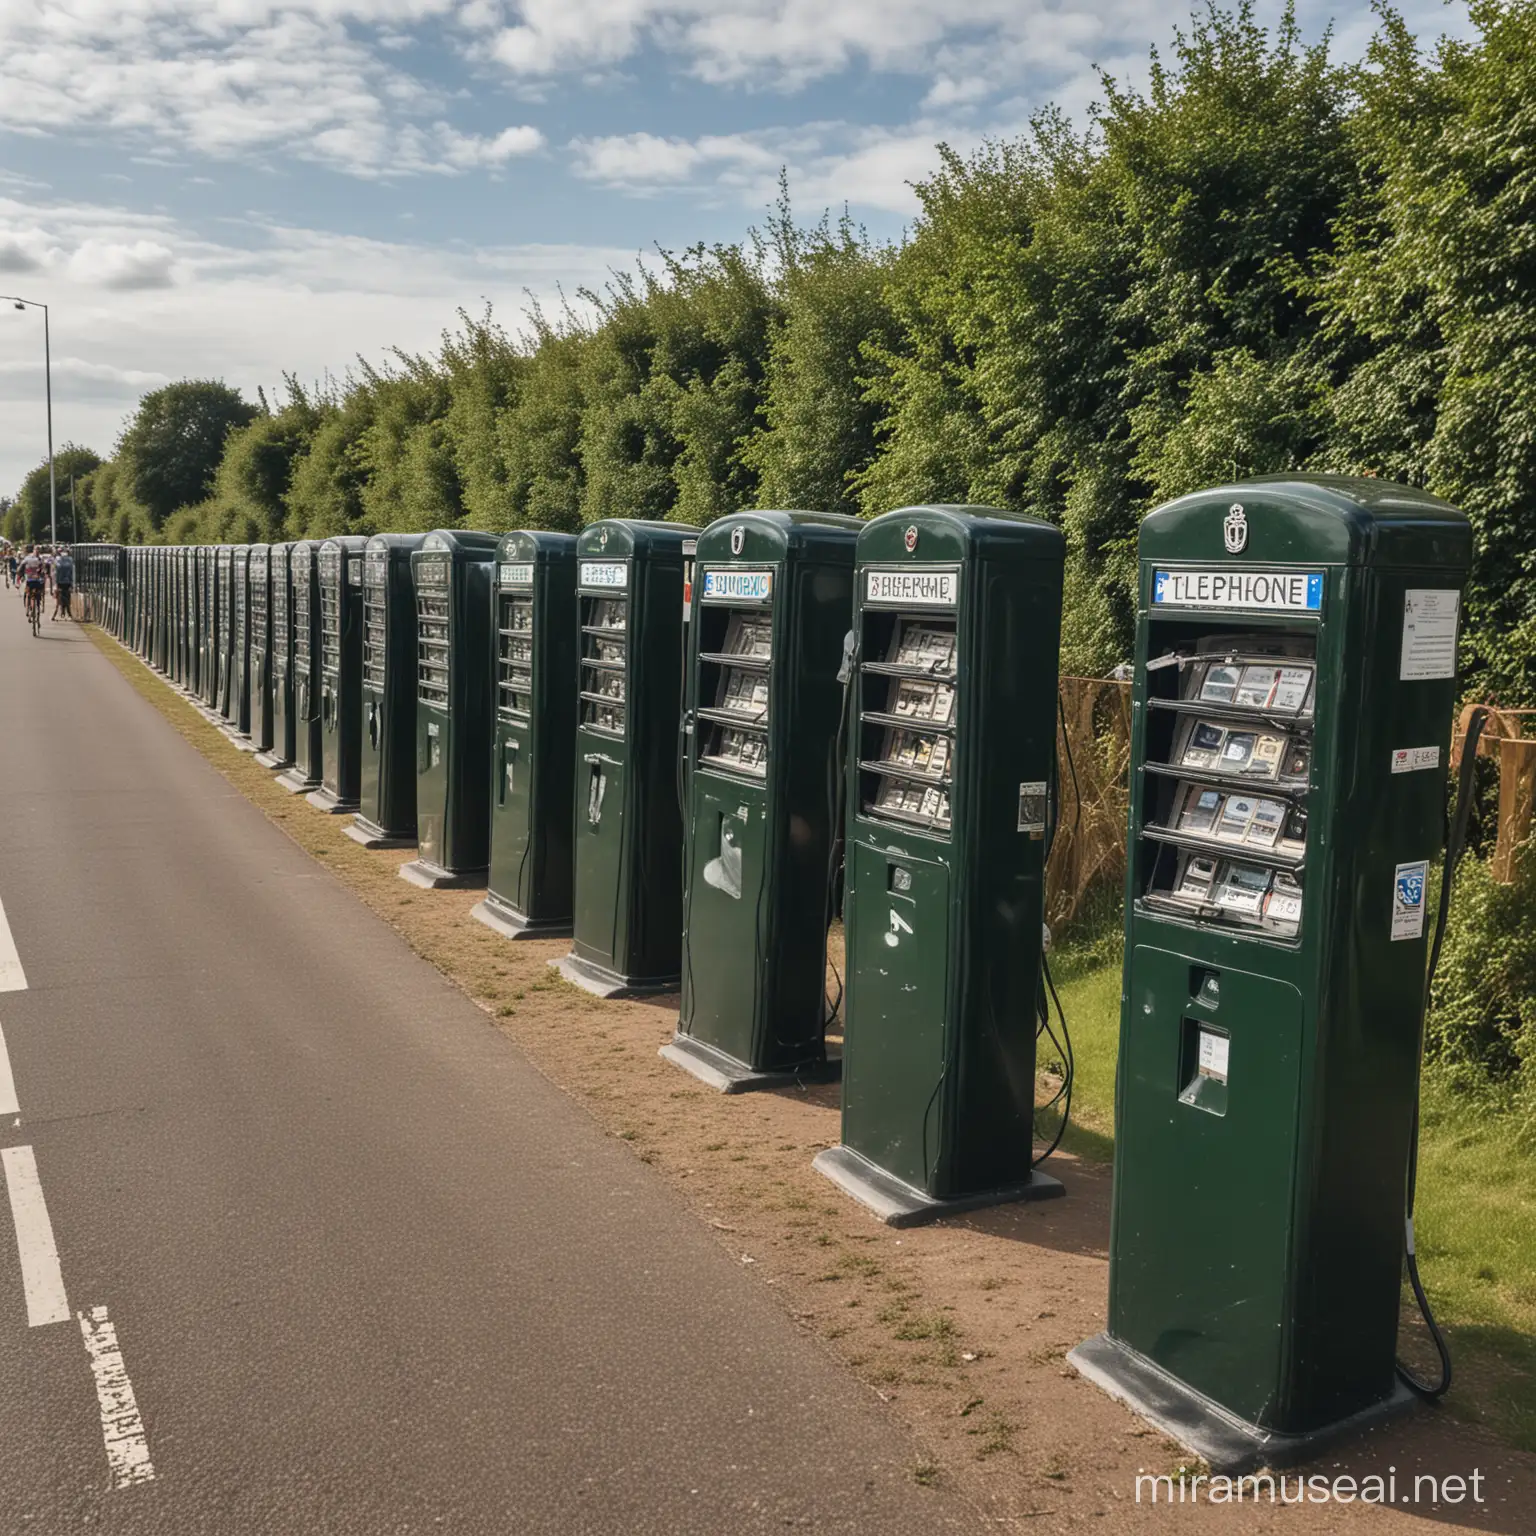 A world-class cycle road race. Public telephones are lined up along the course.